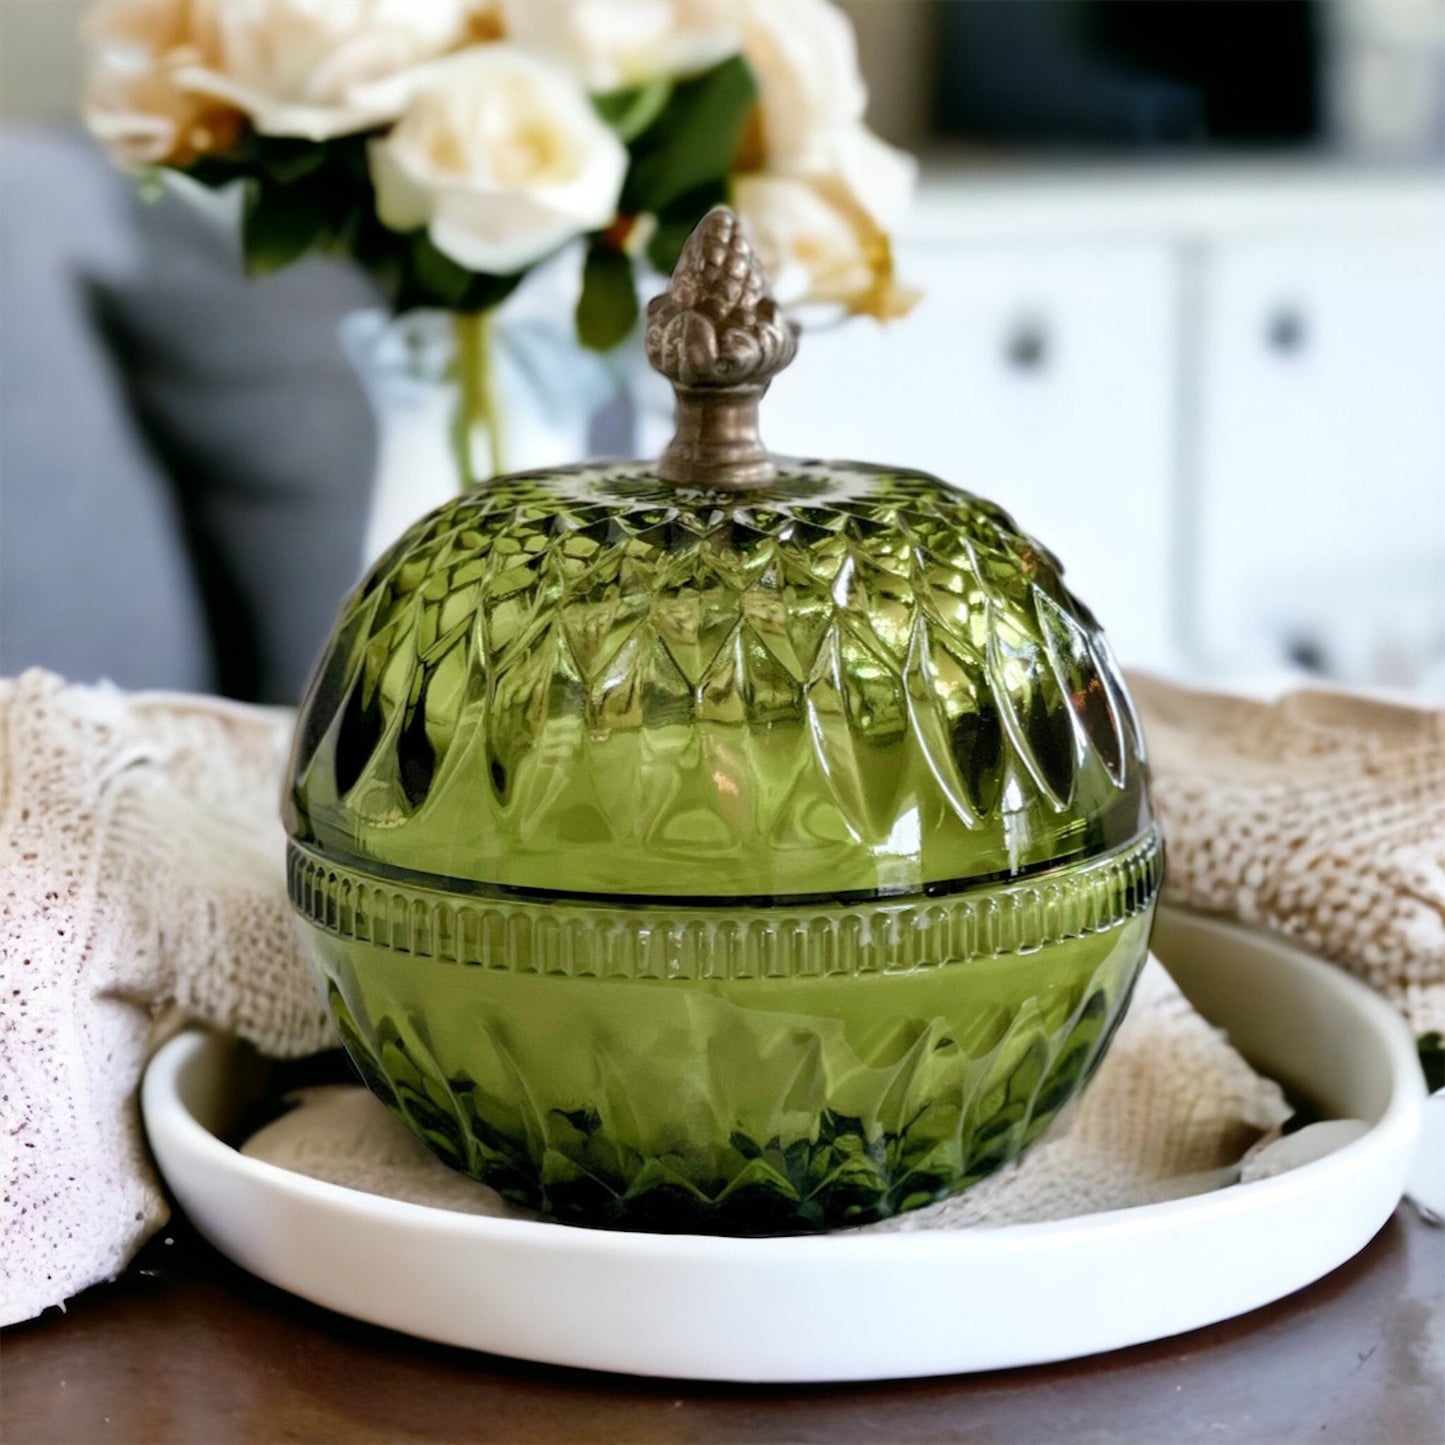 Cypress & Bayberry Holiday Soy Candle in Vintage Pumpkin Candy Dish